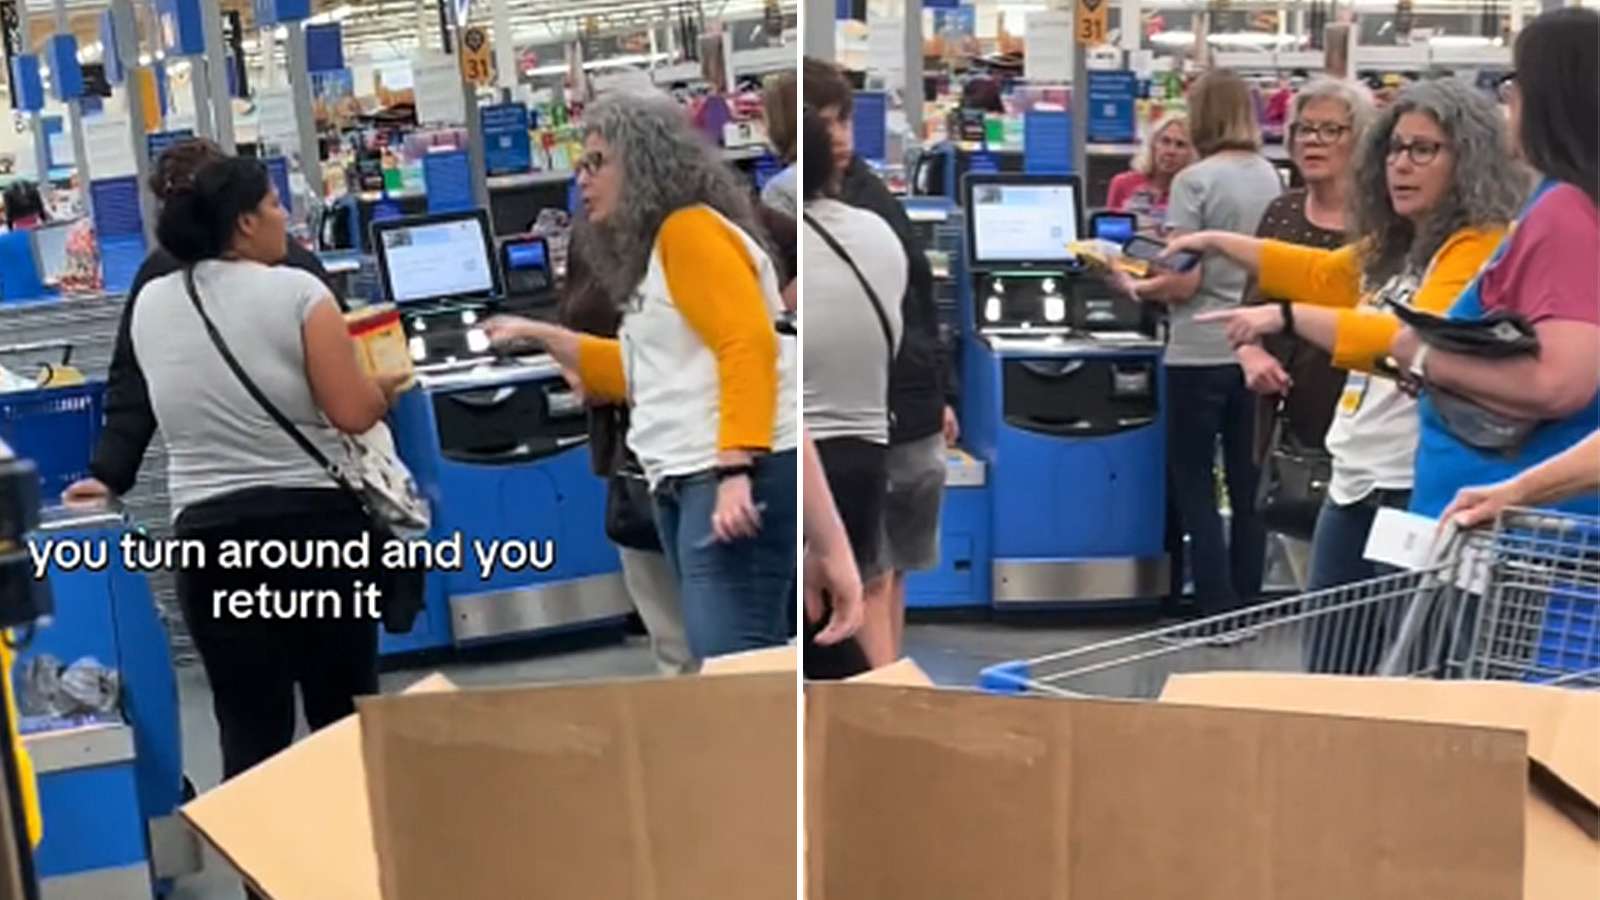 walmart-worker-praised-calling-out-scam-viral